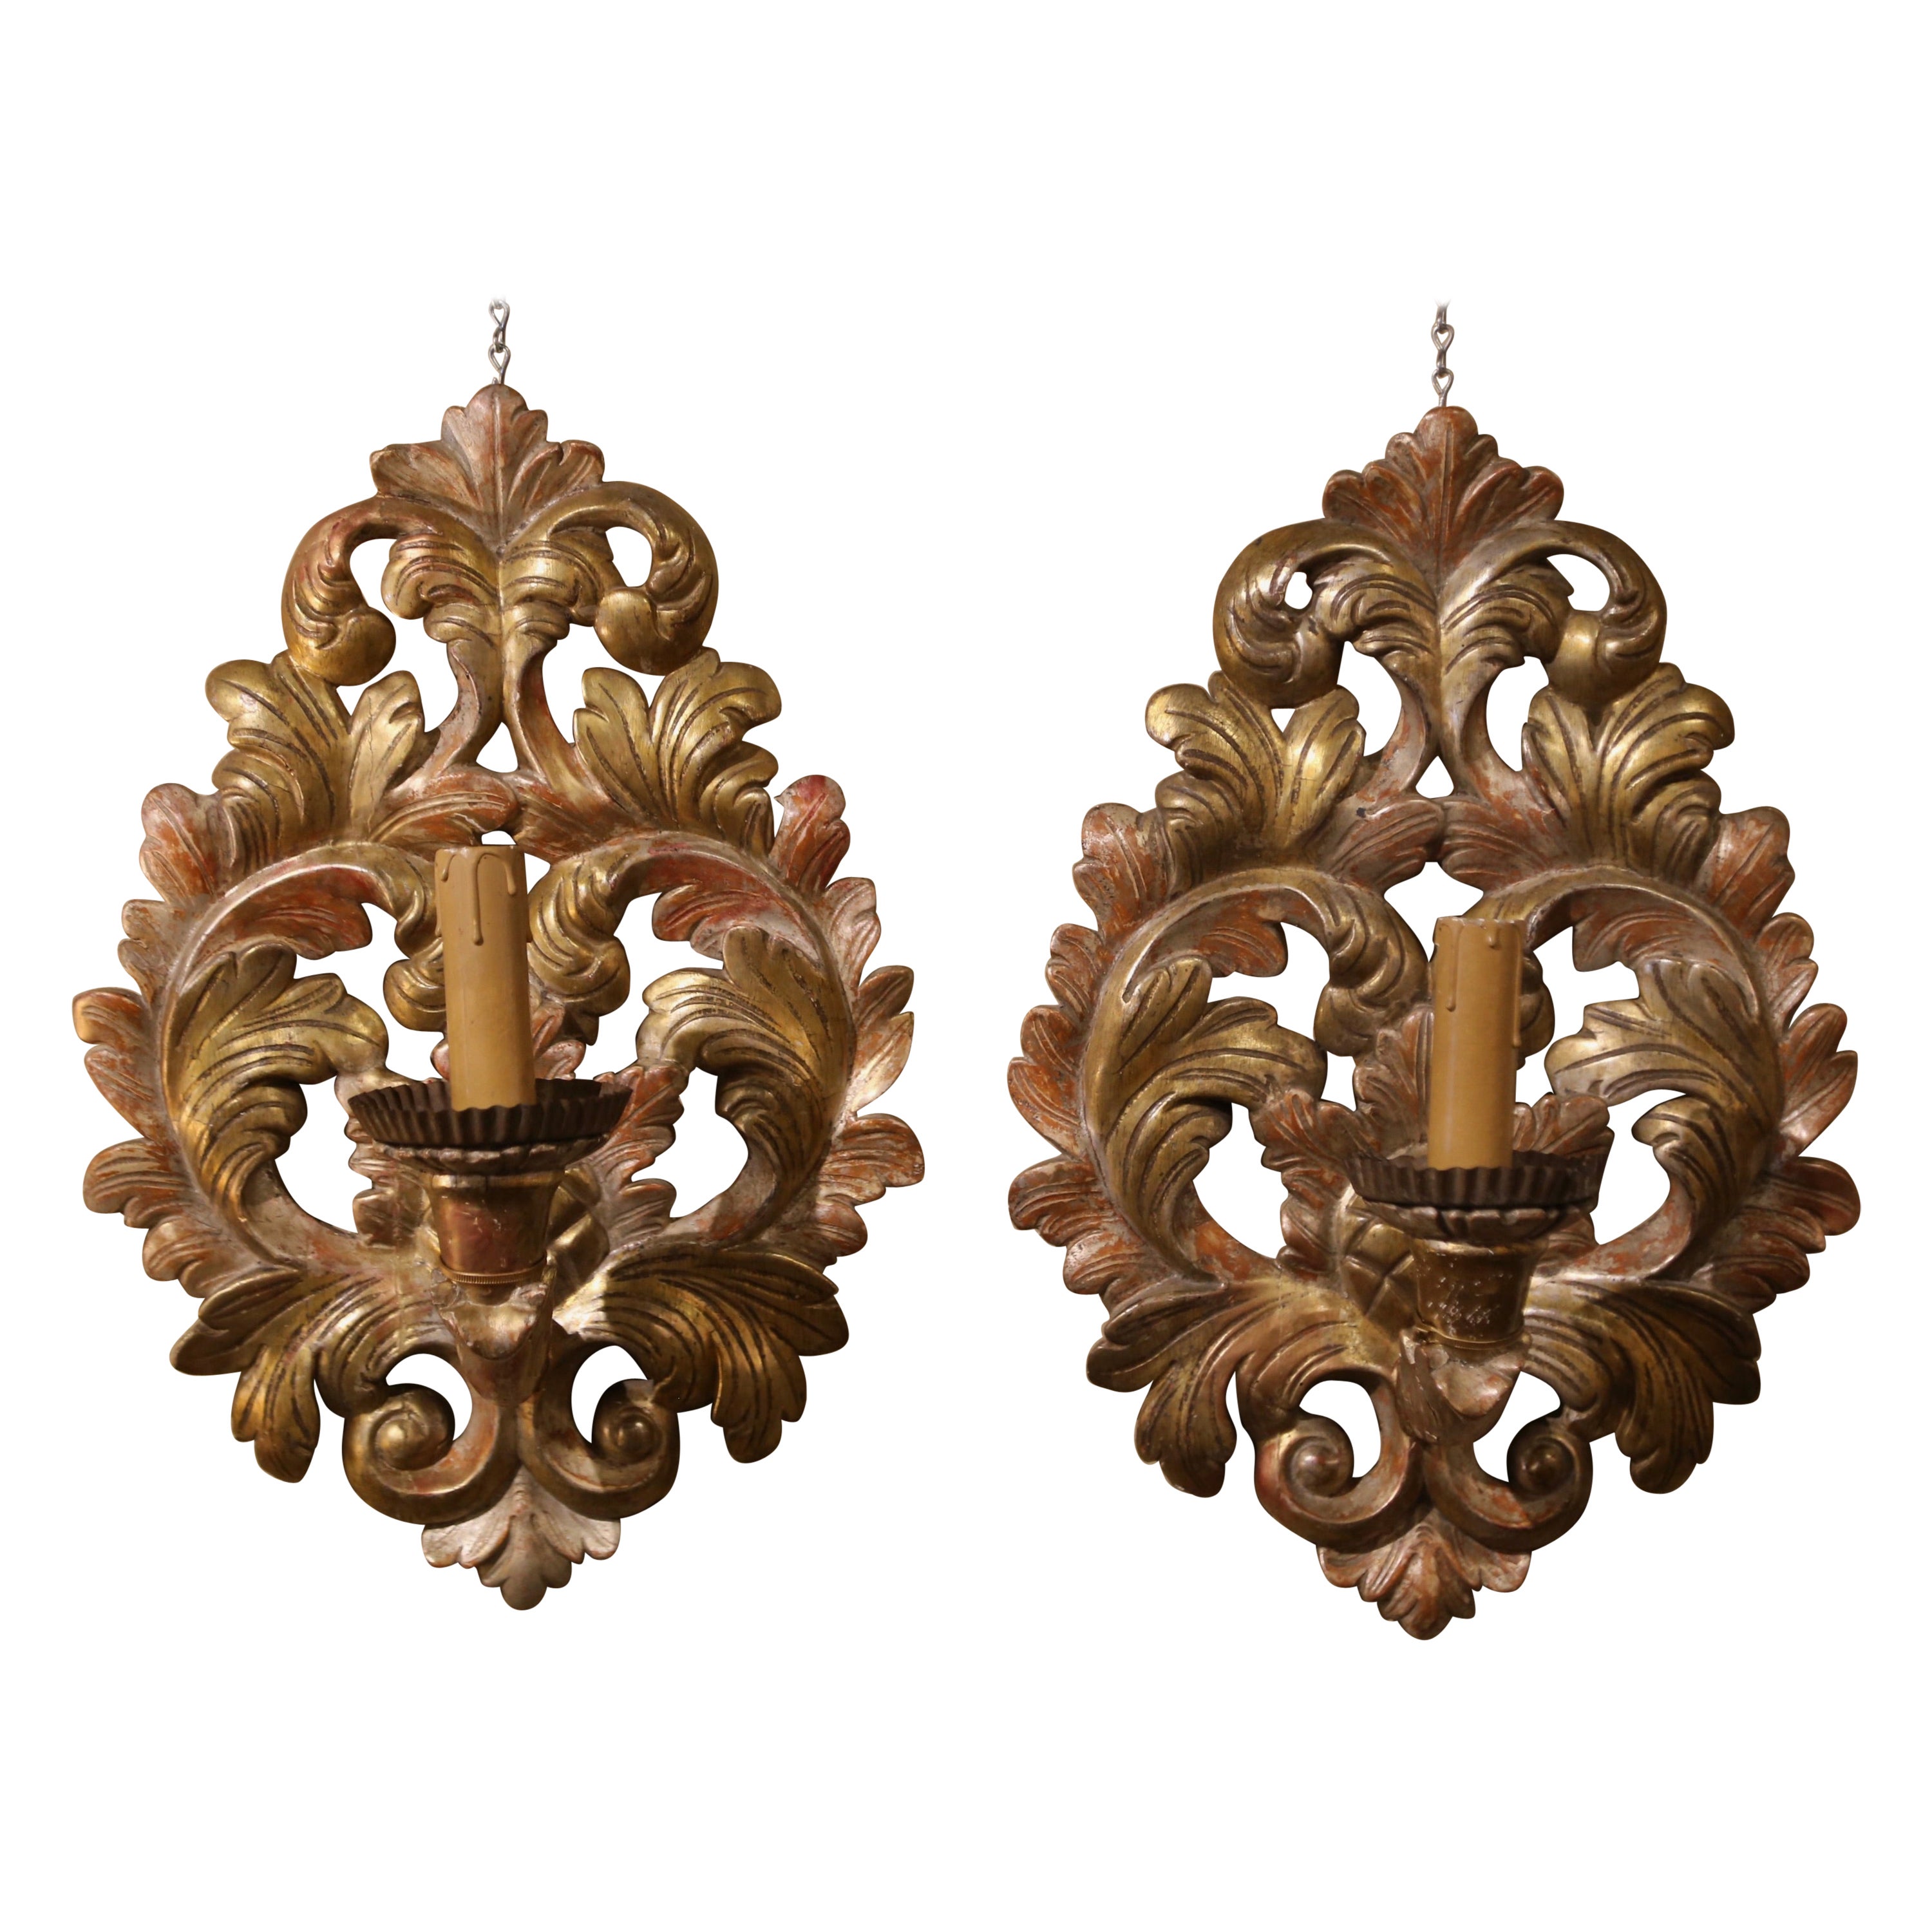 Pair of 19th Century French Carved Giltwood Wall Sconces with Leaf Motifs For Sale